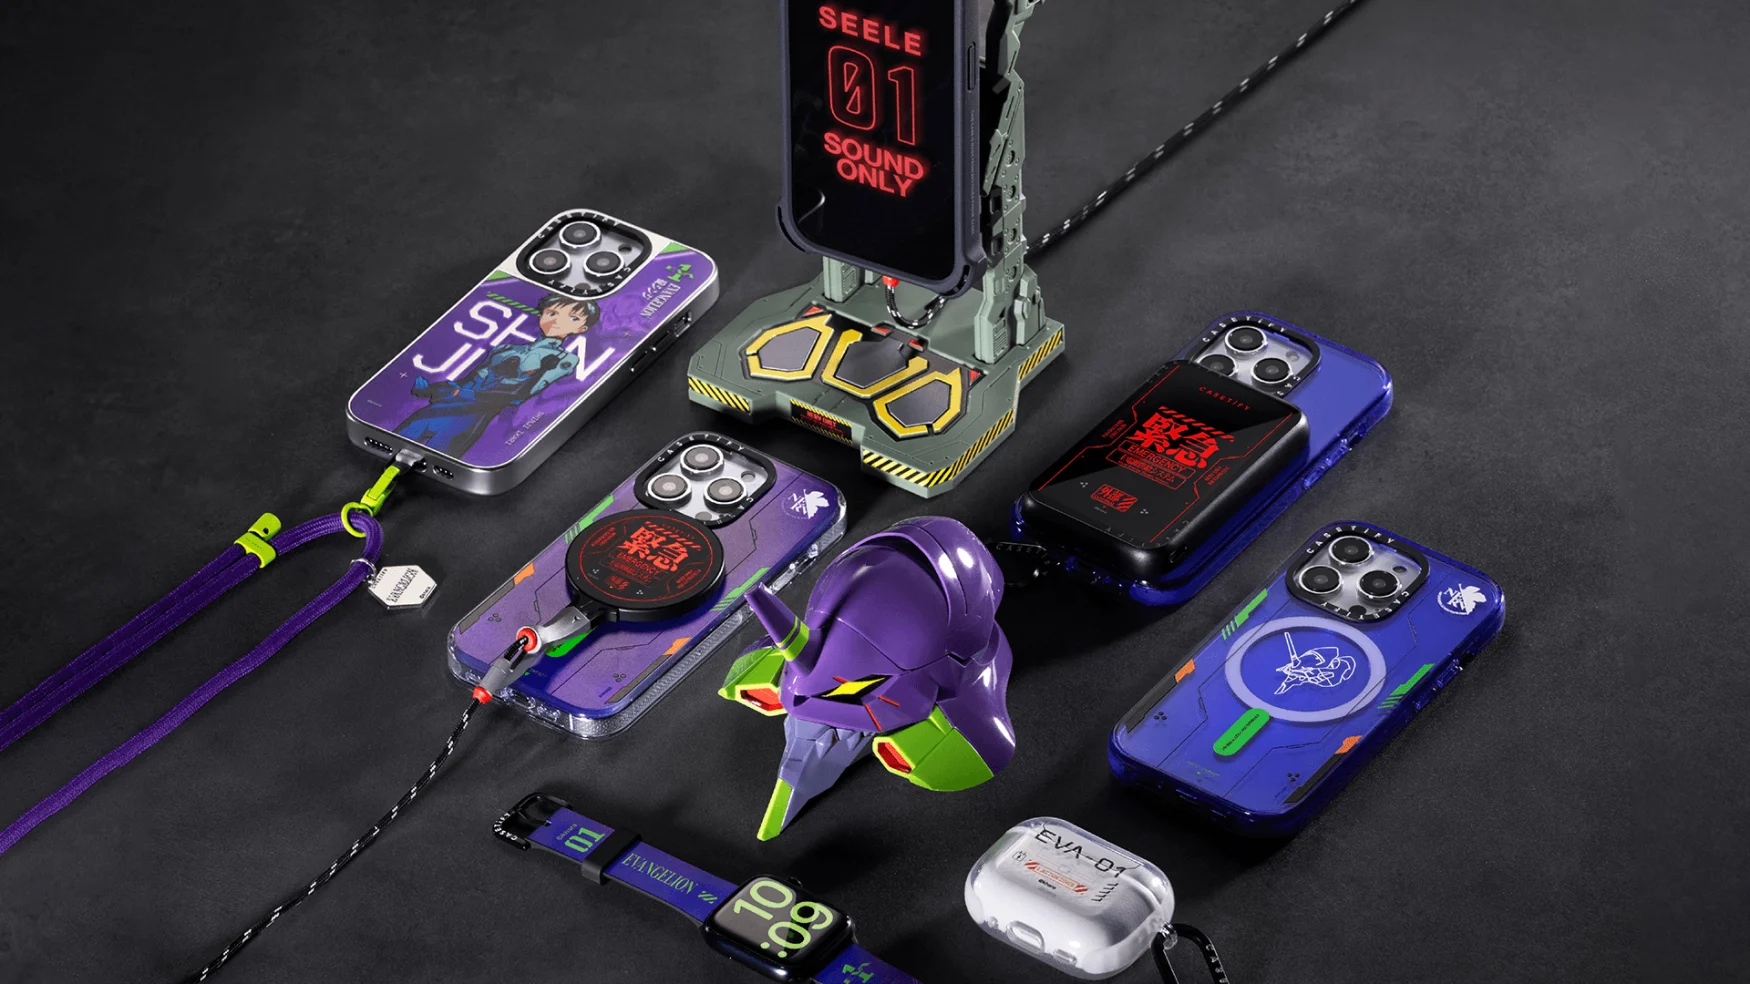 886b26c0 1ceb 11ee bff9 6e0832302aca.cf Casetify’s ‘Evangelion’ series lets you put AirPods in the robot